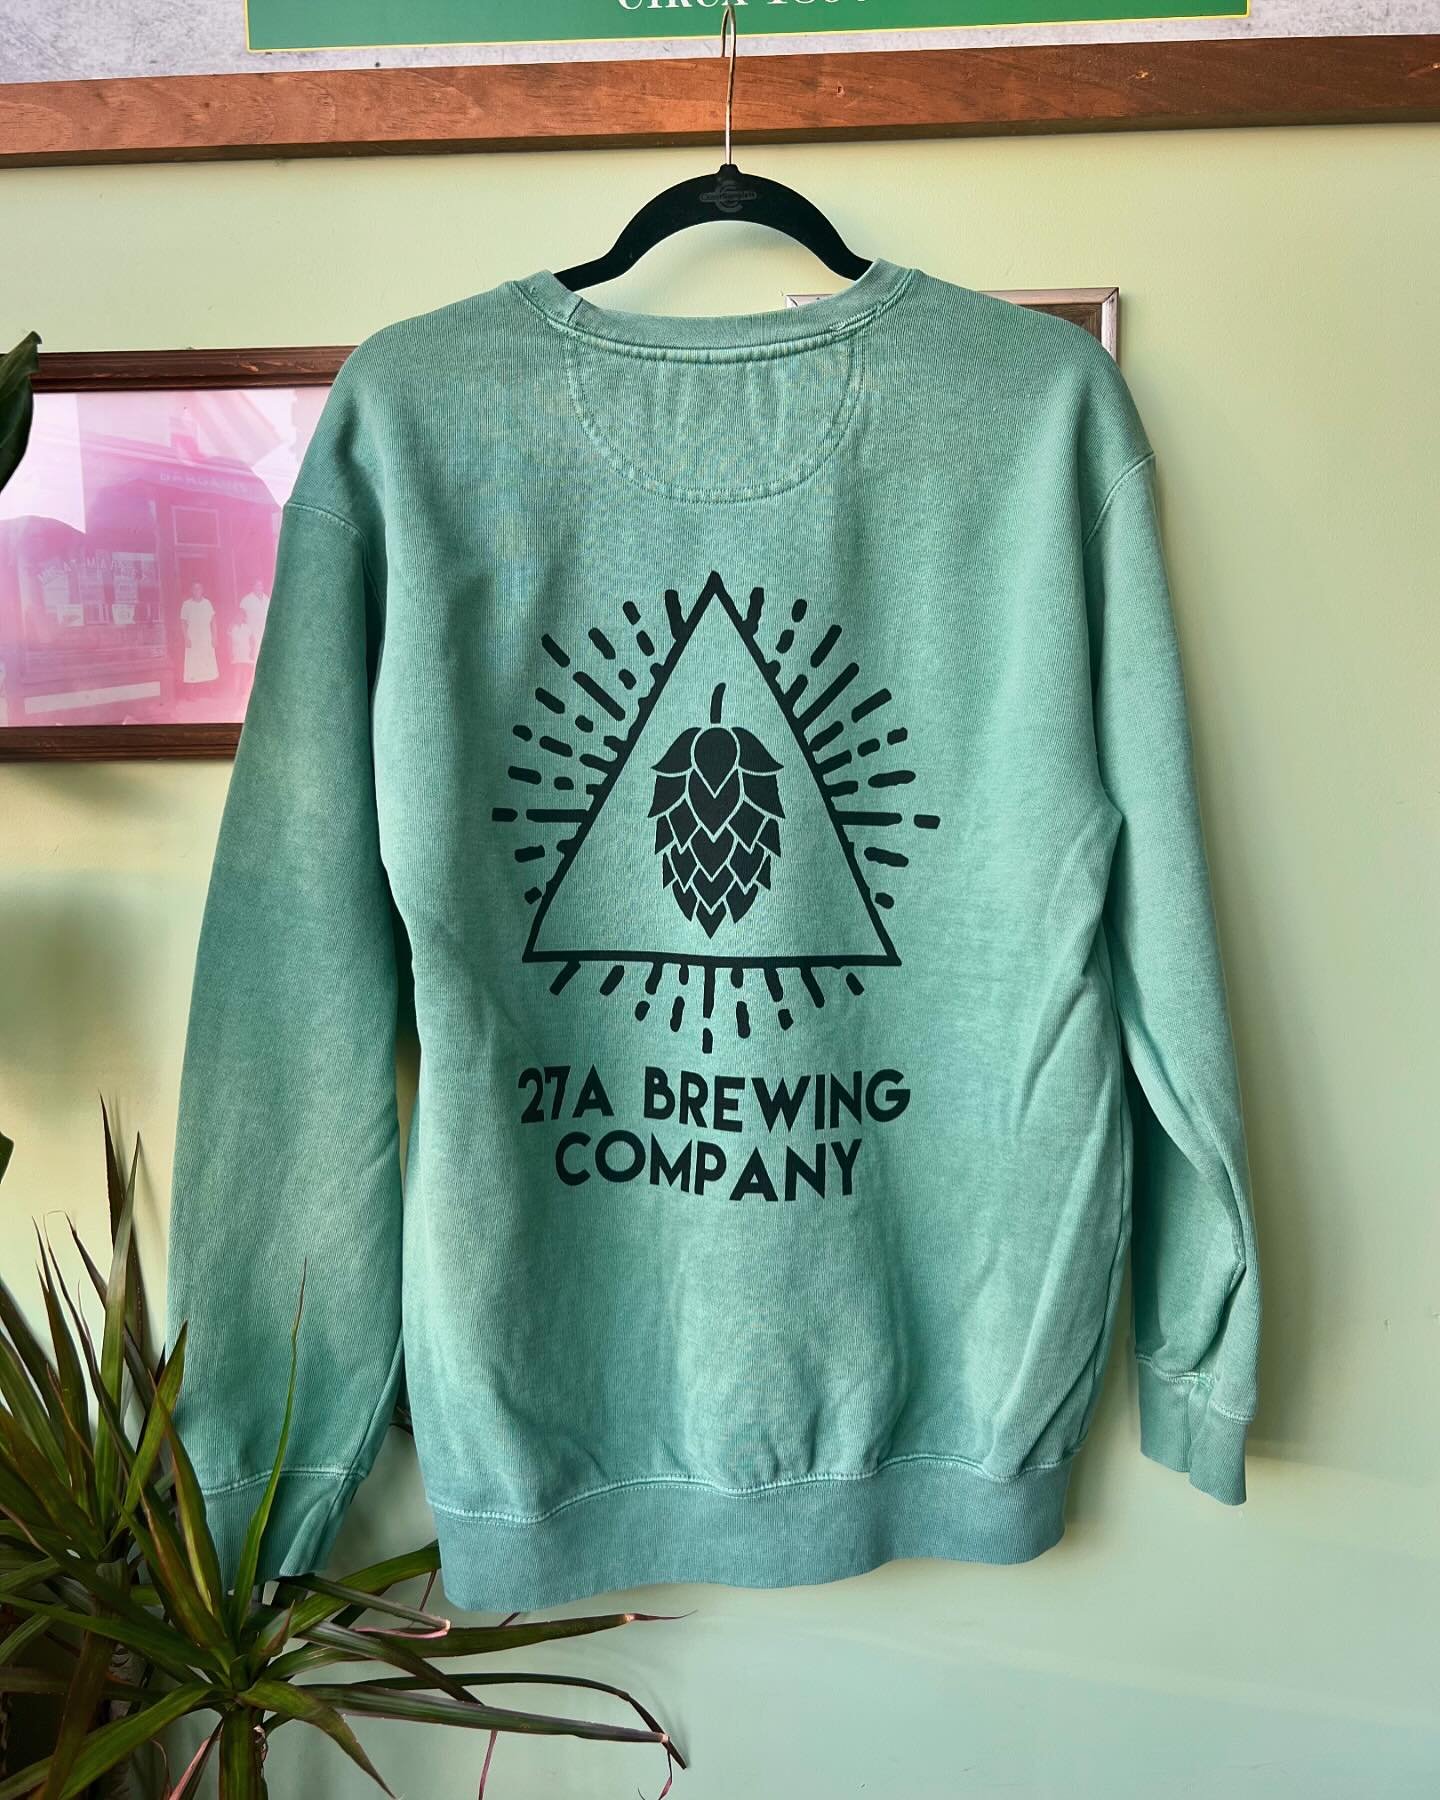 Happy Saturday! It&rsquo;s a pretty nice day to sit outside with some beverages. If you get chilly, we&rsquo;re stocked up on our best selling crew neck sweatshirts 👌🤗

Open 1-11 🍻✨